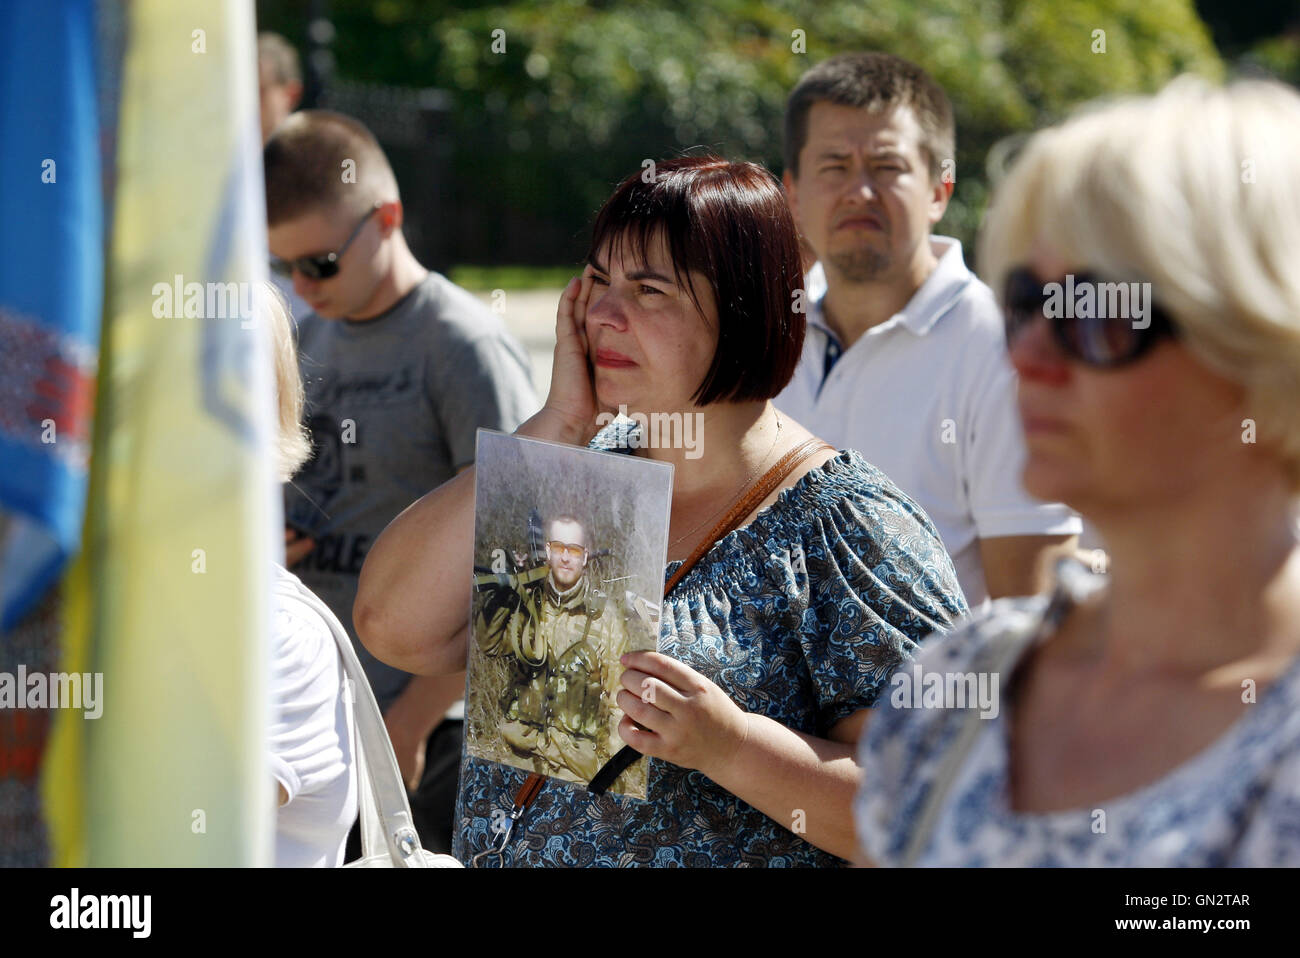 Kiev, Ukraine. 28th Aug, 2016. People hold portraits of killed and missing Ukrainian servicemen during the 2014 battle which took place in a small town Ilovaysk near Donetsk known as the battle of ''Ilovaisk kettle'', during a rally to mark the second anniversary of the battle, in Kiev, Ukraine, on 28 August 2016. According the Ukrainian Military prosecutor's office, 366 Ukrainian soldiers were lost and 158 were missing during heavy fighting between Ukrainian government forces and pro-Russian separatists near of Ilovaysk at August 2014 at the East of Ukraine. (Credit Image: © Serg Glovny via Stock Photo